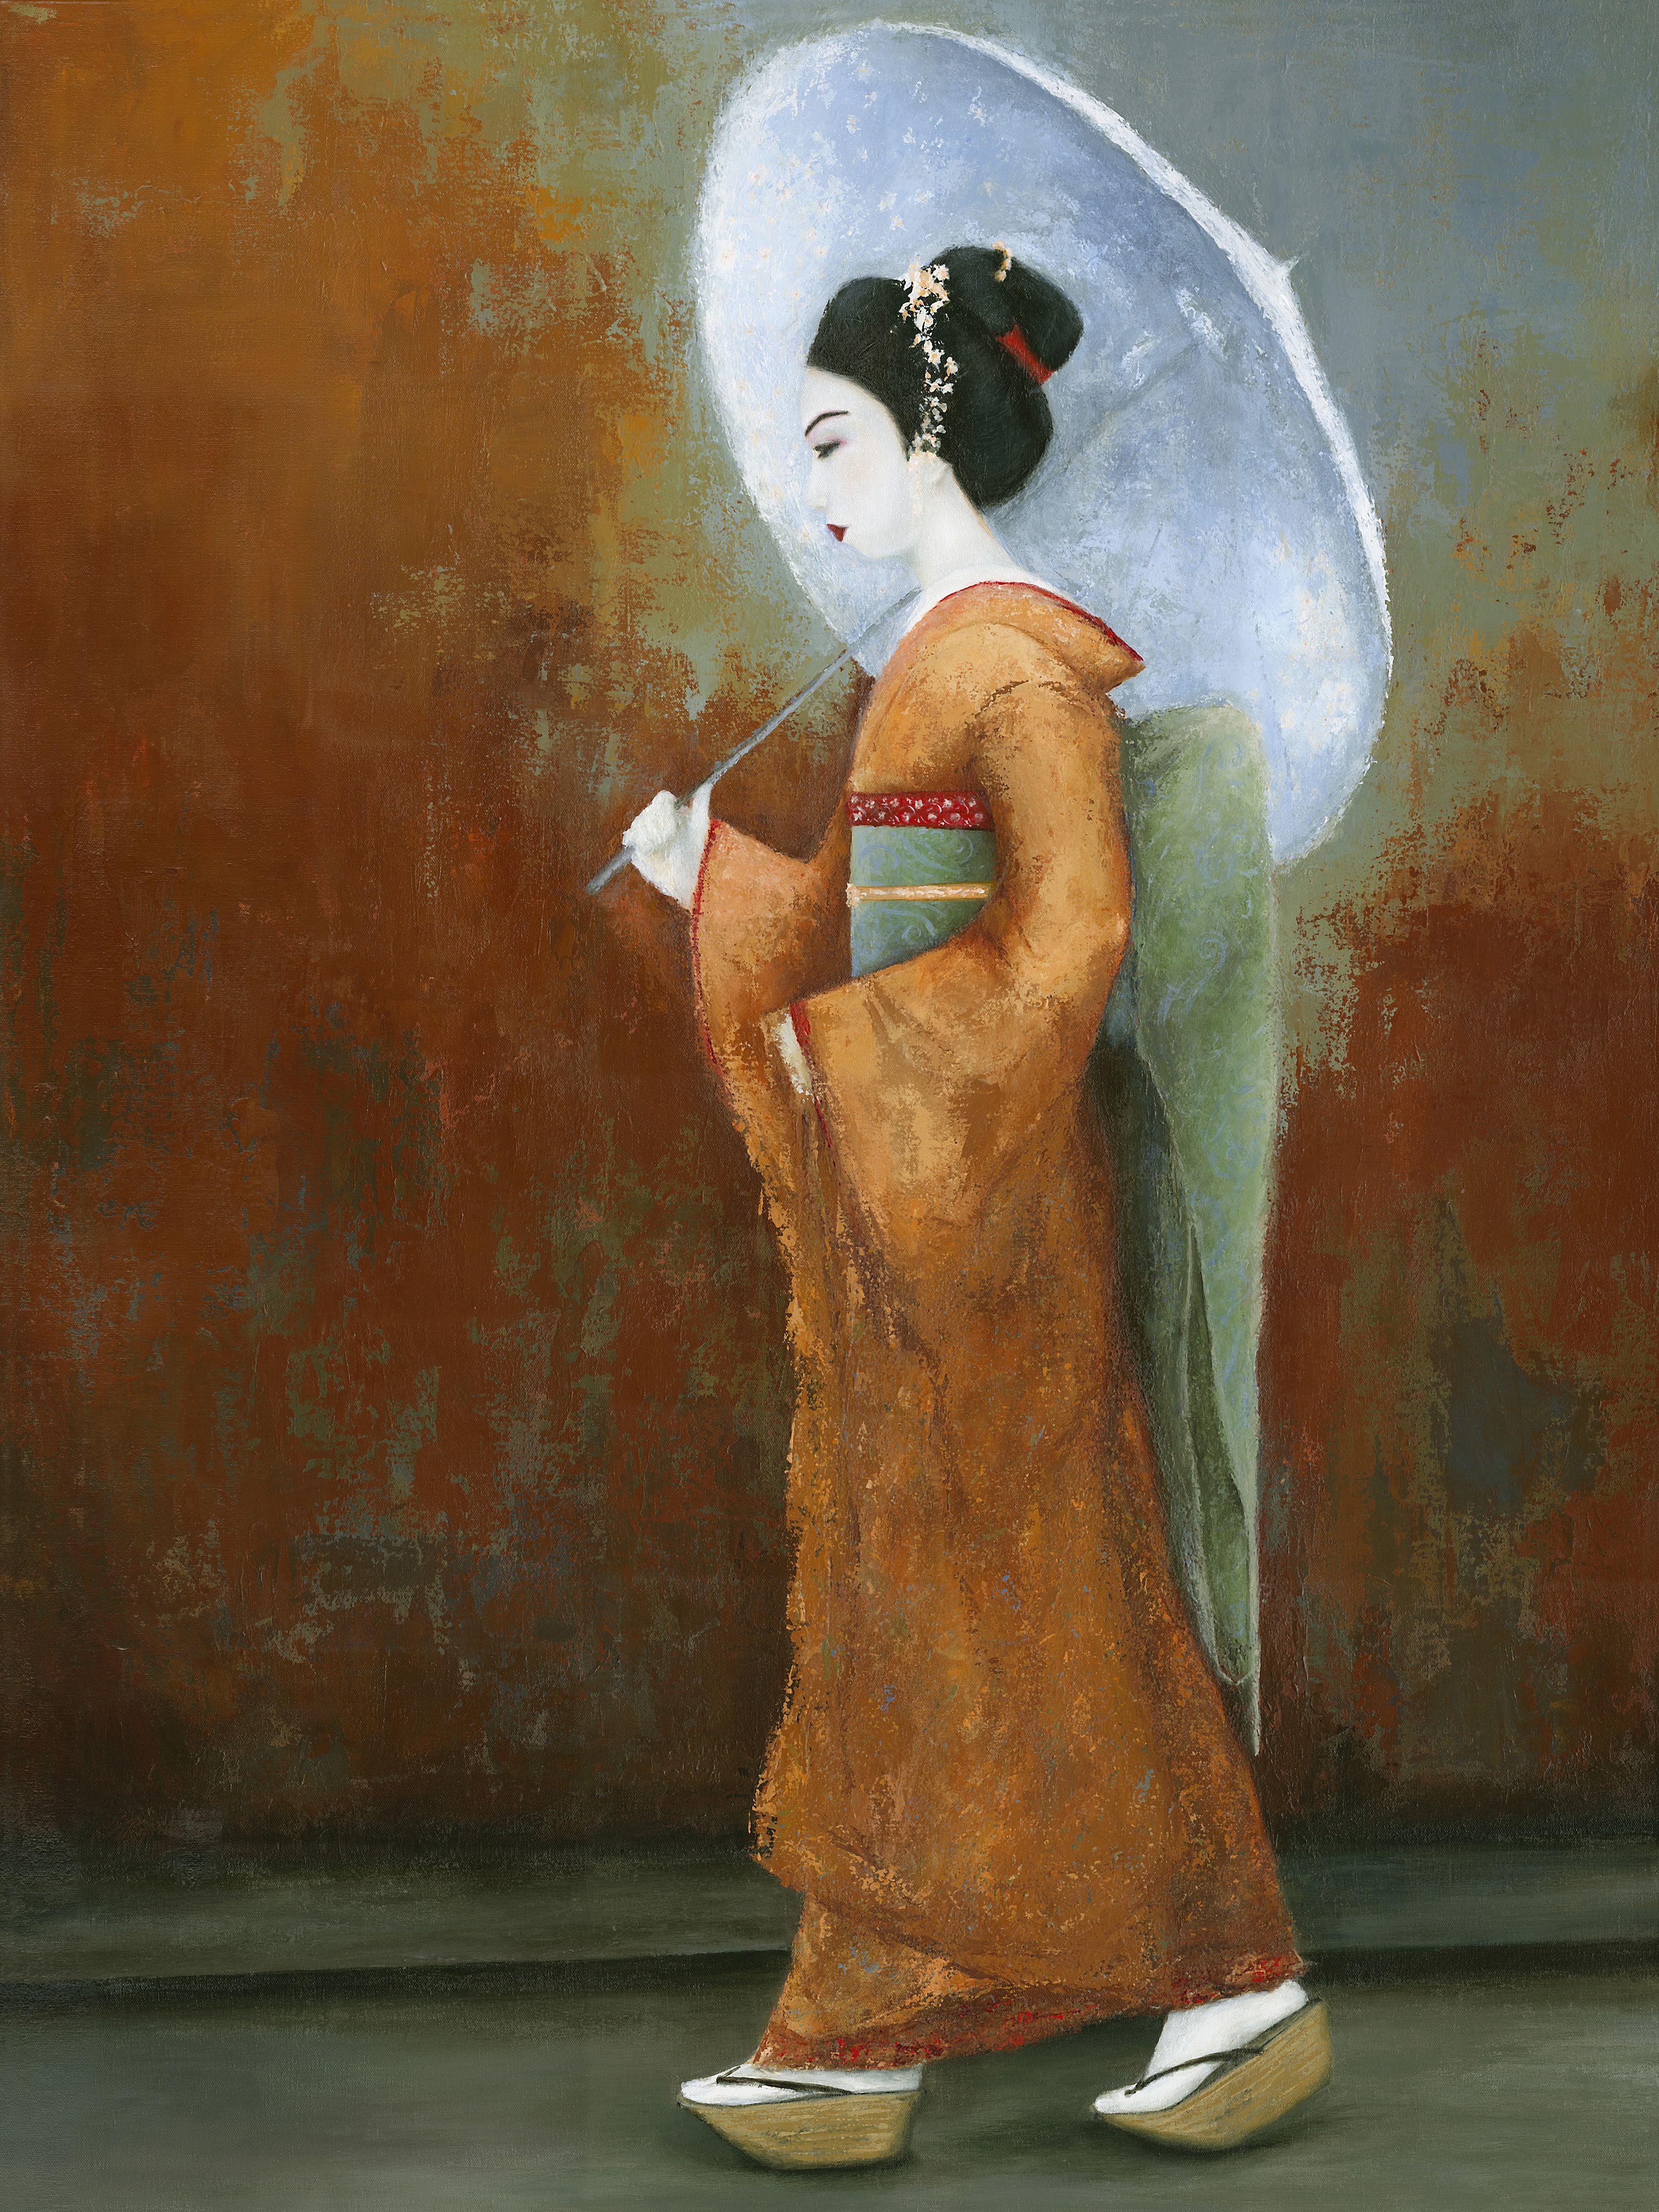 A guardian of traditional culture, she walks along the streets of Gion. Her world is one of secrecy and mystery. A world that has existed for hundreds of years.    -THE FEATURED ARTWORK was created using professional grade artist paints on gallery